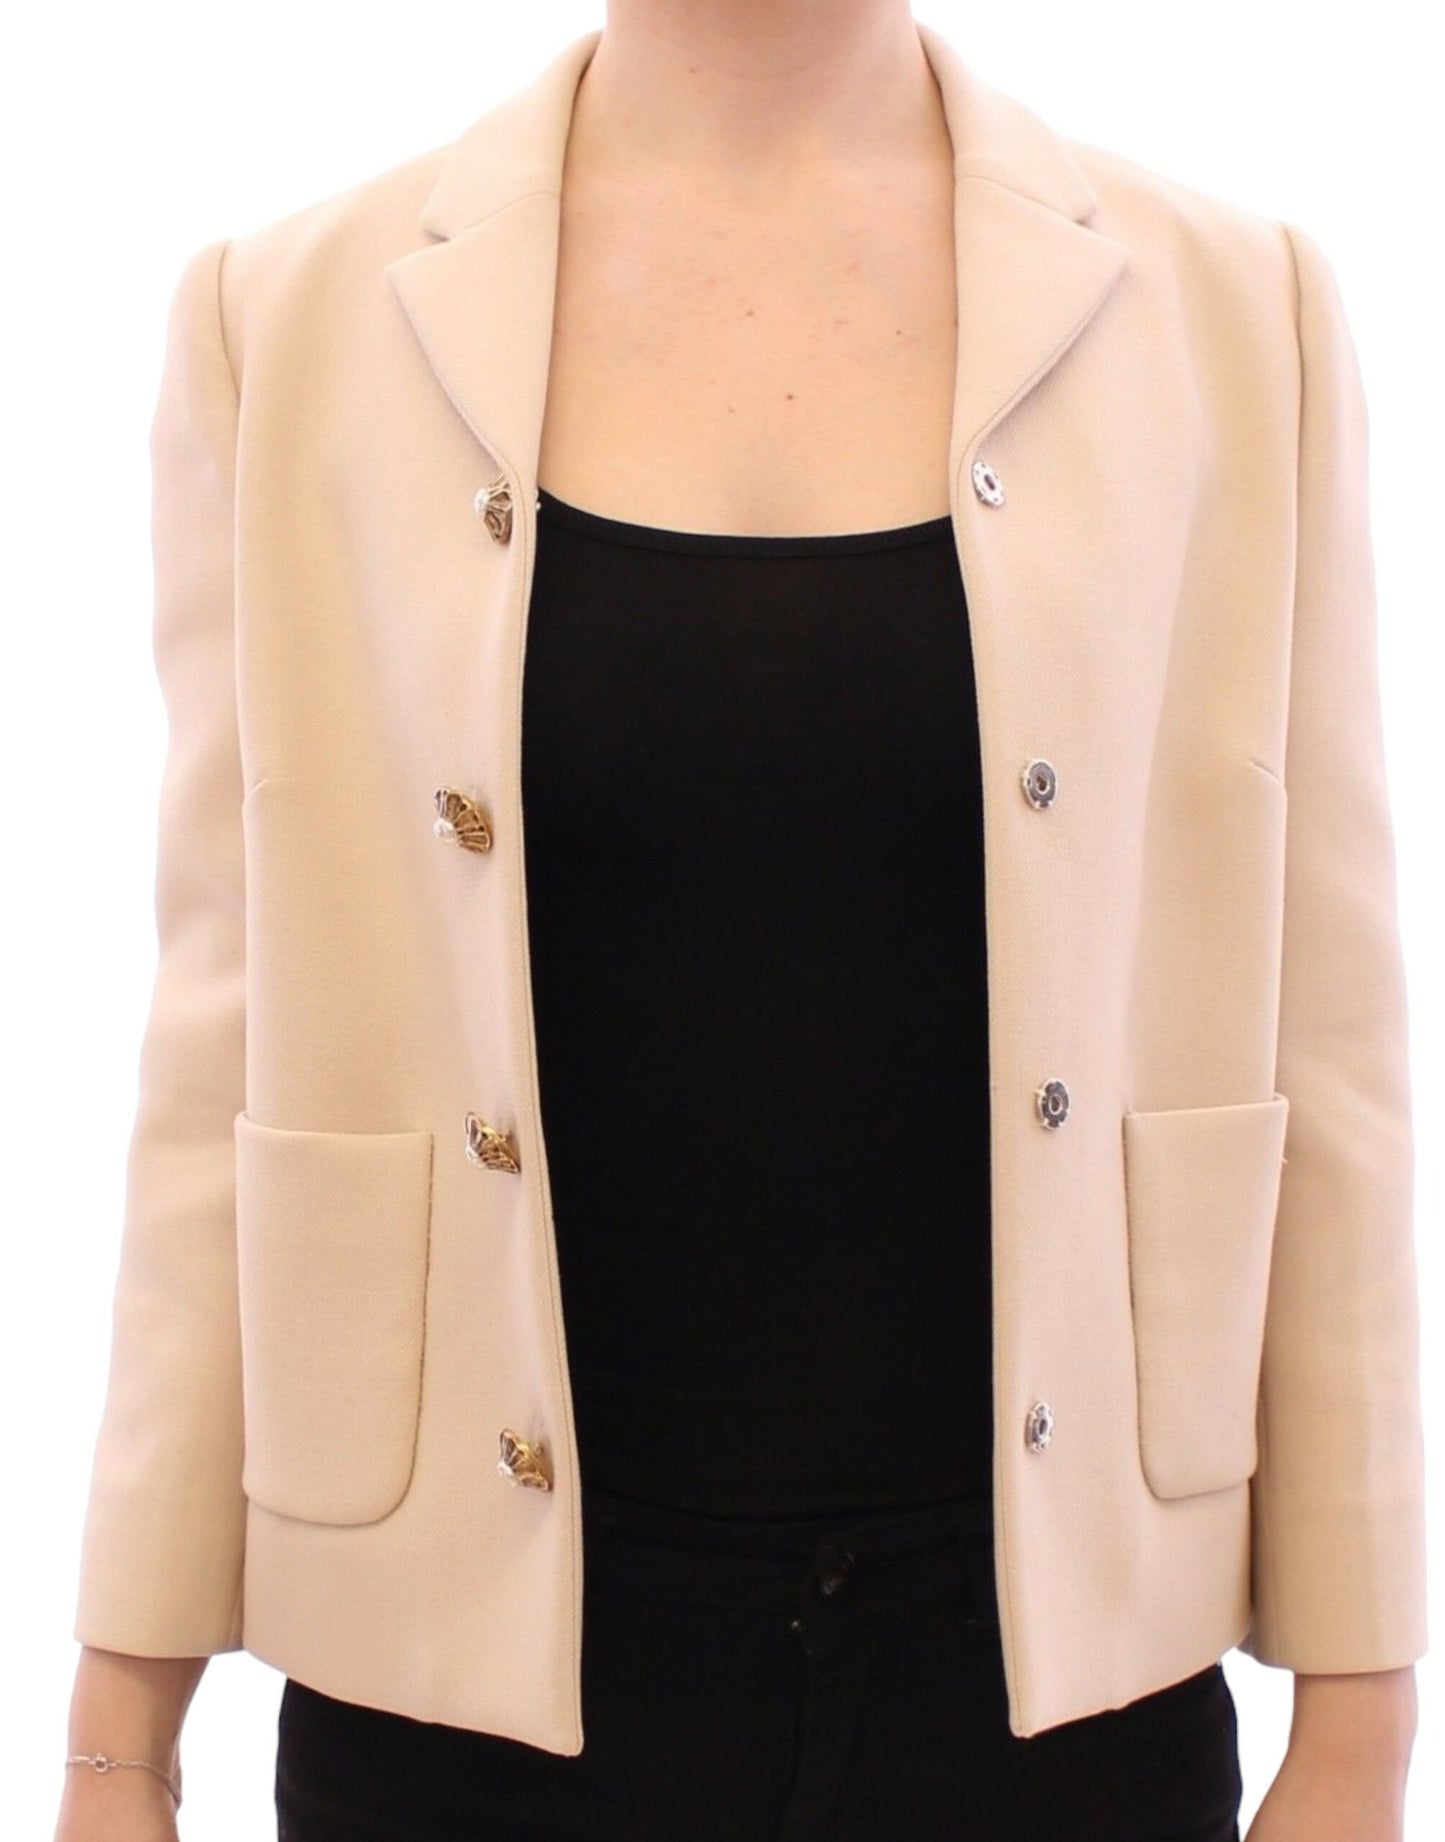 Elegant Beige Wool-Blend Jacket with Gold Accents